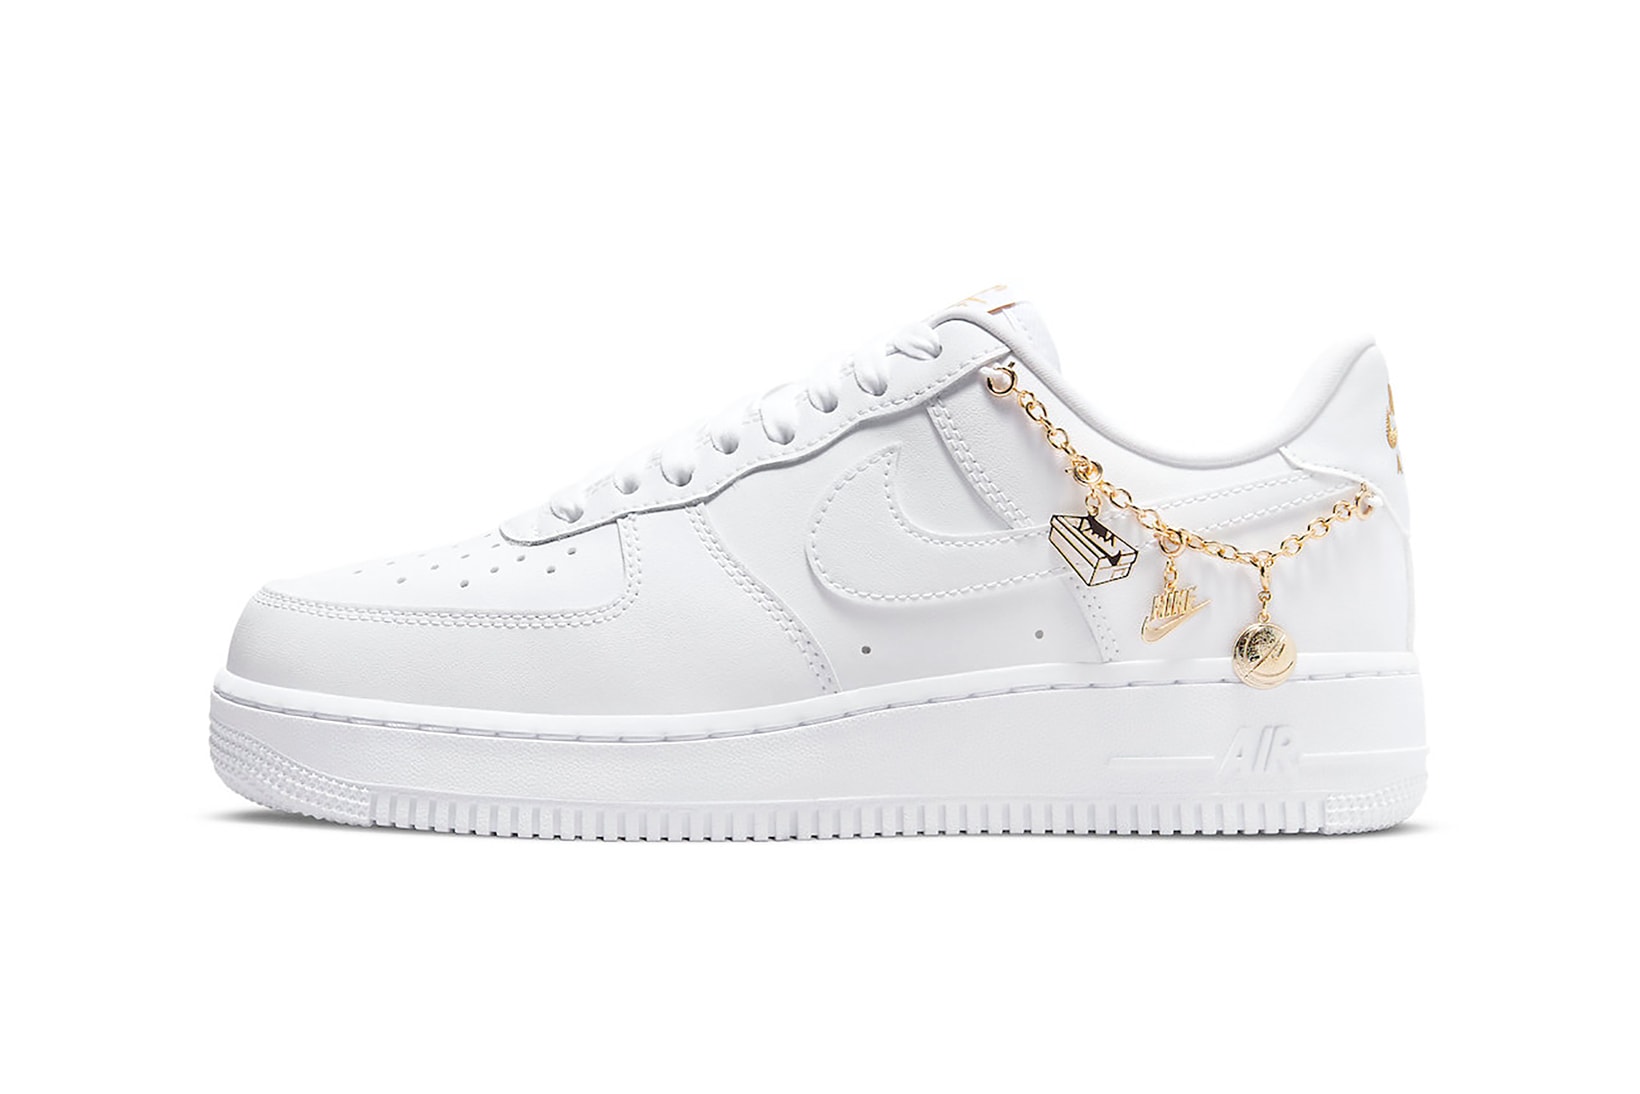 Nike Air Force 1 AF1 Low LX Lucky Charms White Gold Footwear Kicks Sneakers Shoes